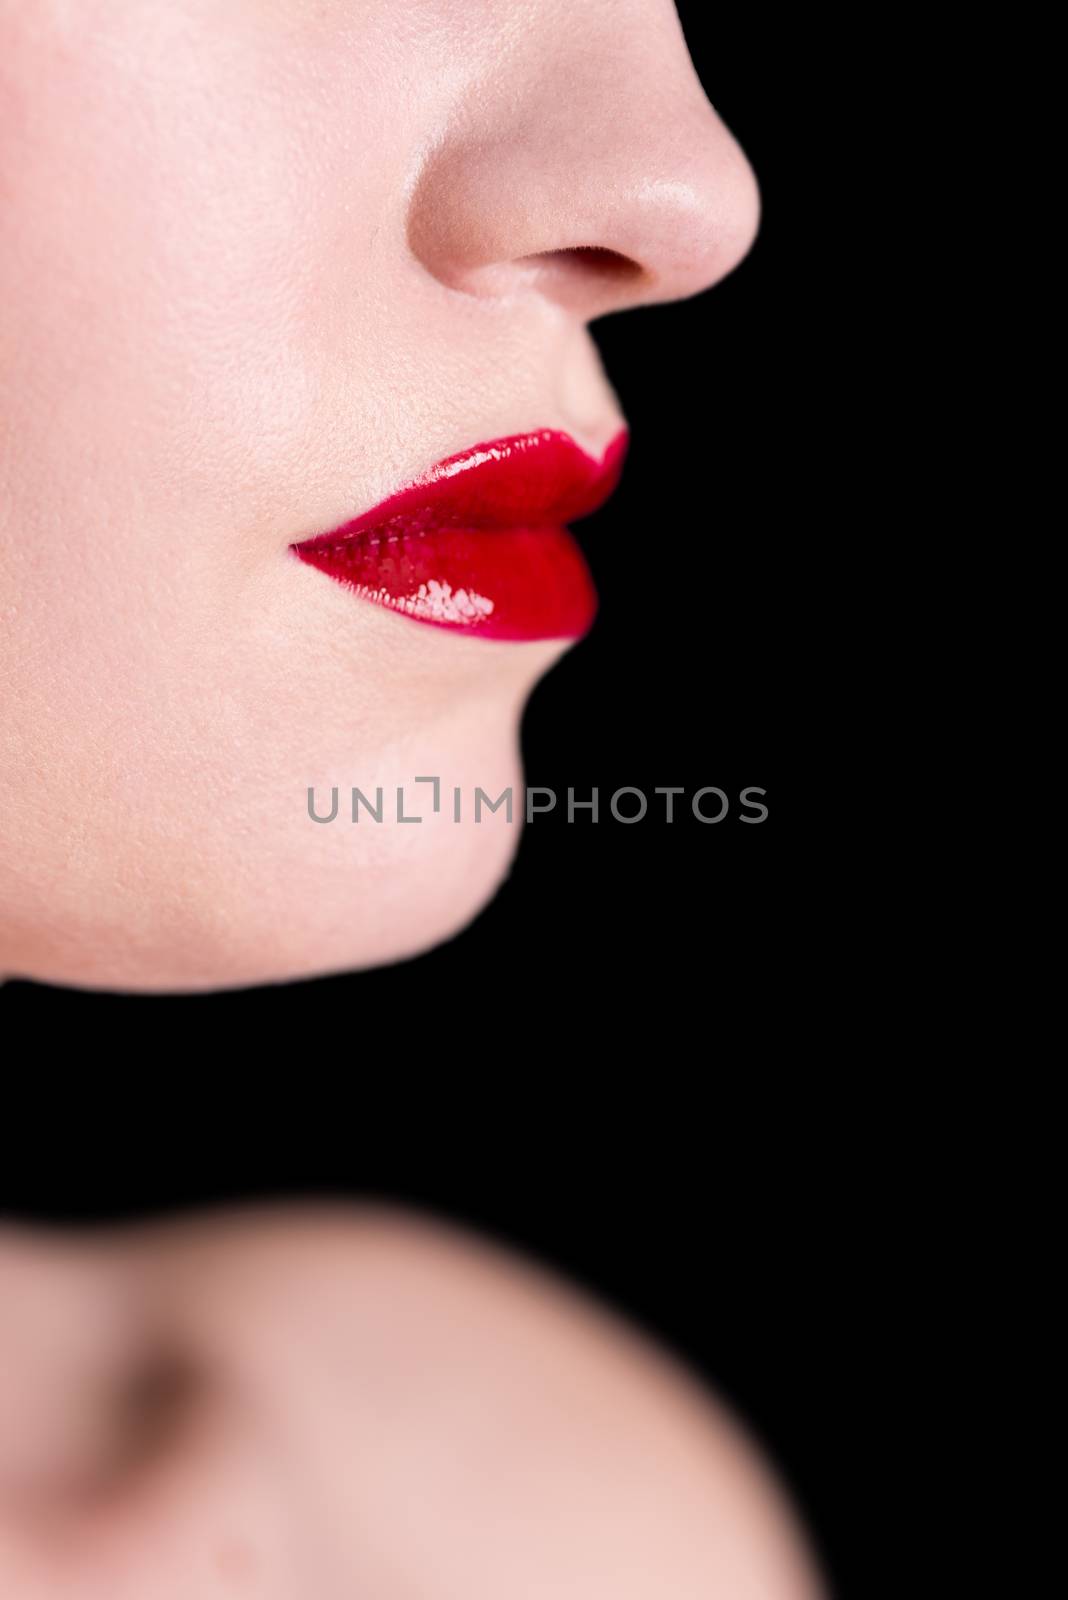 Close-up shot of woman lips with glossy red lipstick